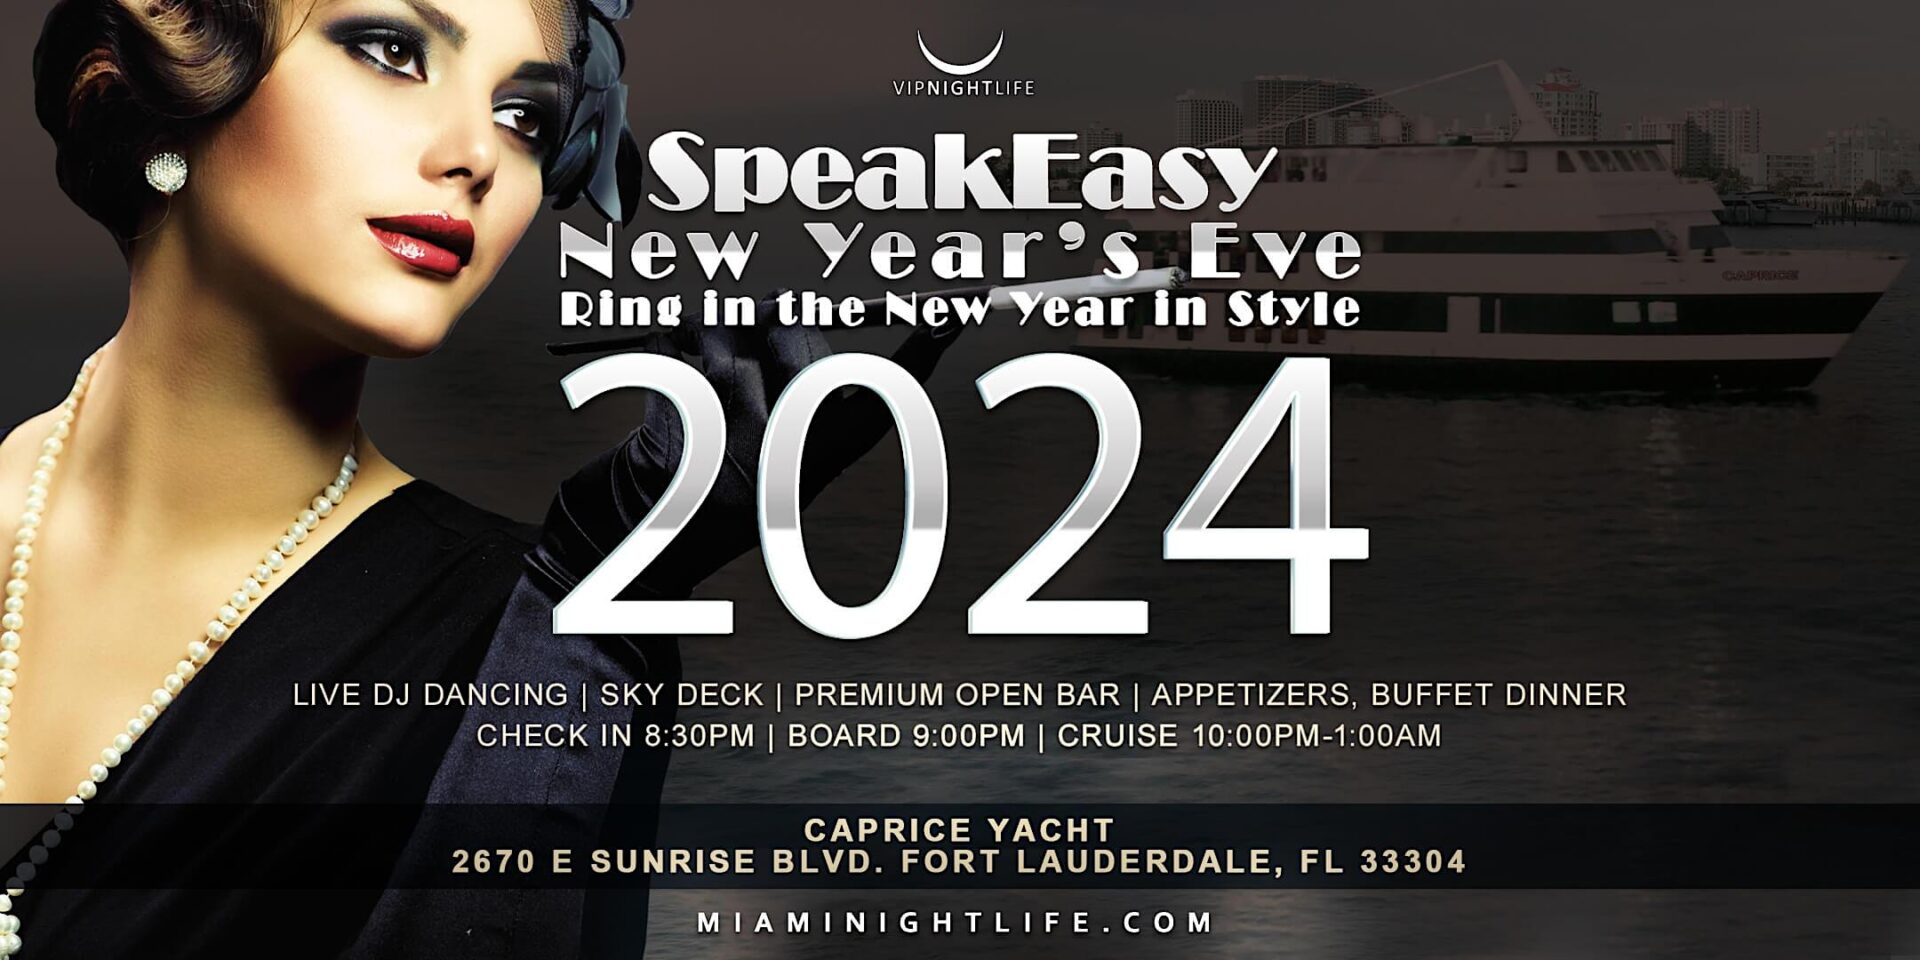 Speakeasy Fort Lauderdale New Year's Eve Party Cruise 2024 VIP Nightlife